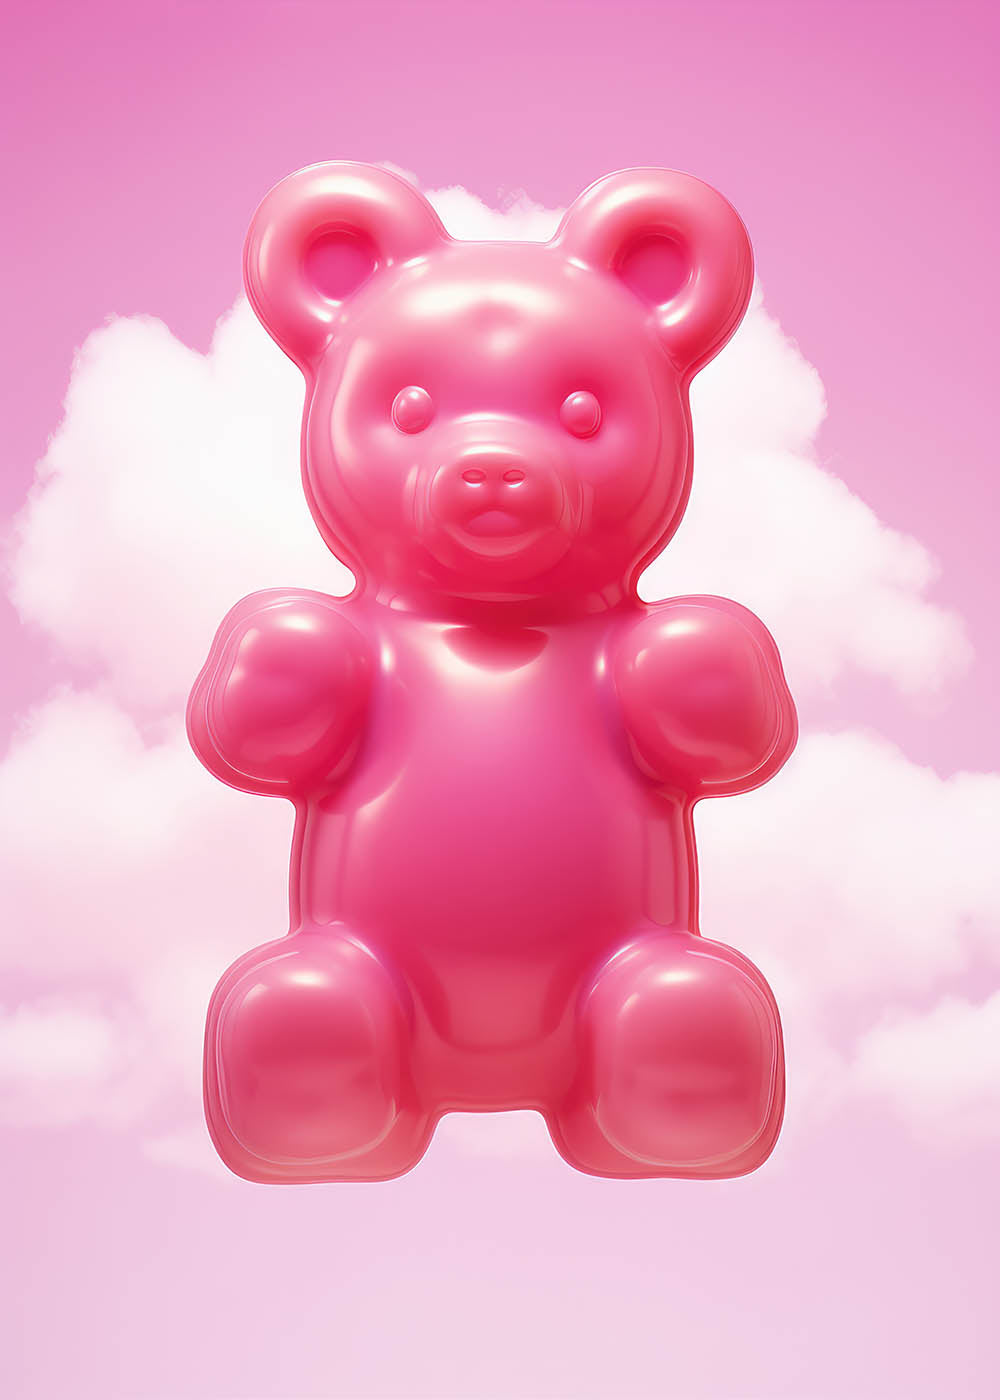 Whimsical Pink Gummy Bear Poster - Vibrant, Candy-Inspired Wall